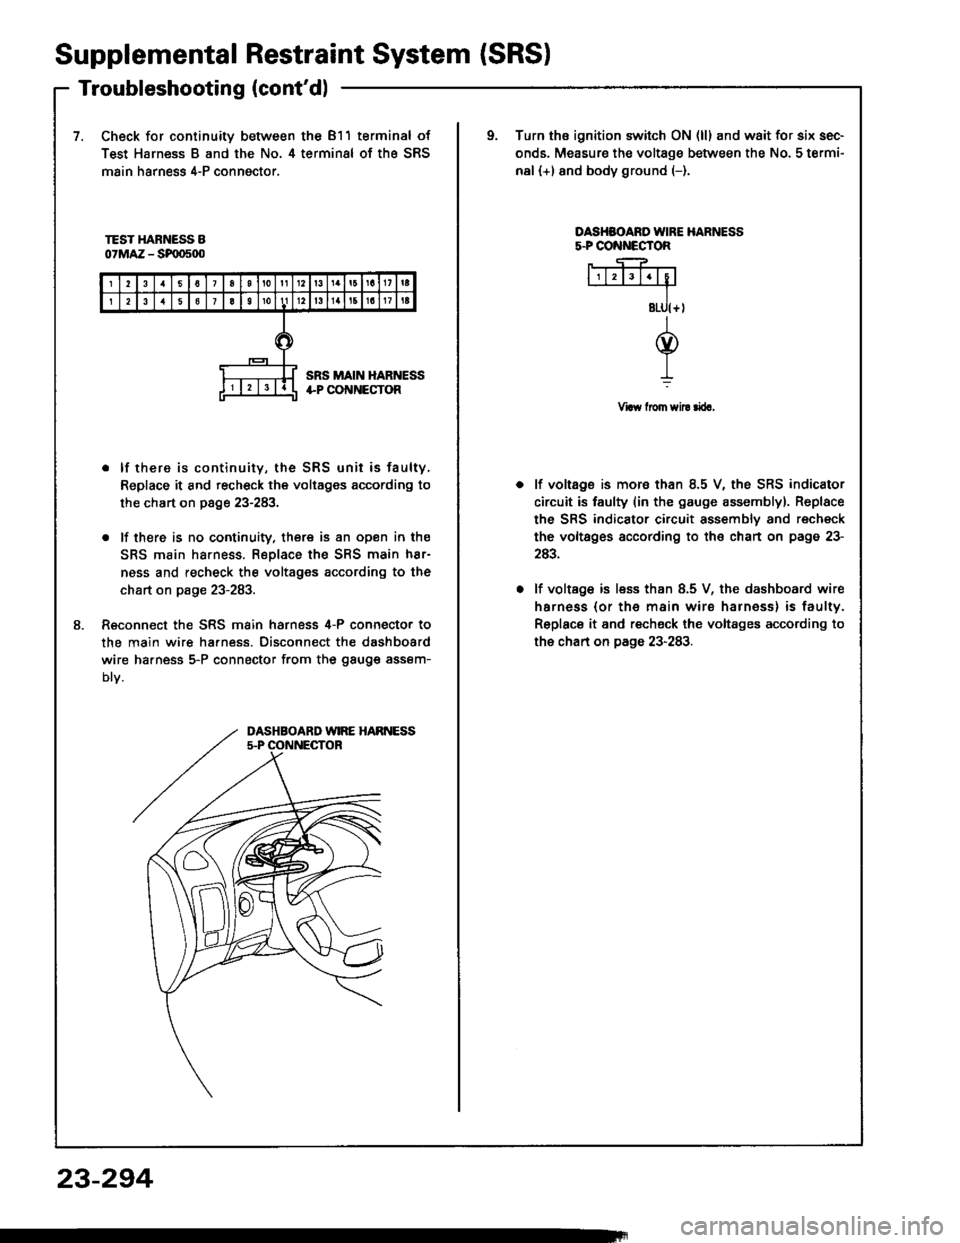 HONDA INTEGRA 1994 4.G Repair Manual Supplemental
Troubleshooting(contdl
RestraintSystem (SRSI
7.Check for continuity between the 811 terminal of
Test Harness B and the No. 4 terminal of the SRS
main harness 4-P conngctor,
oTurn ths ign